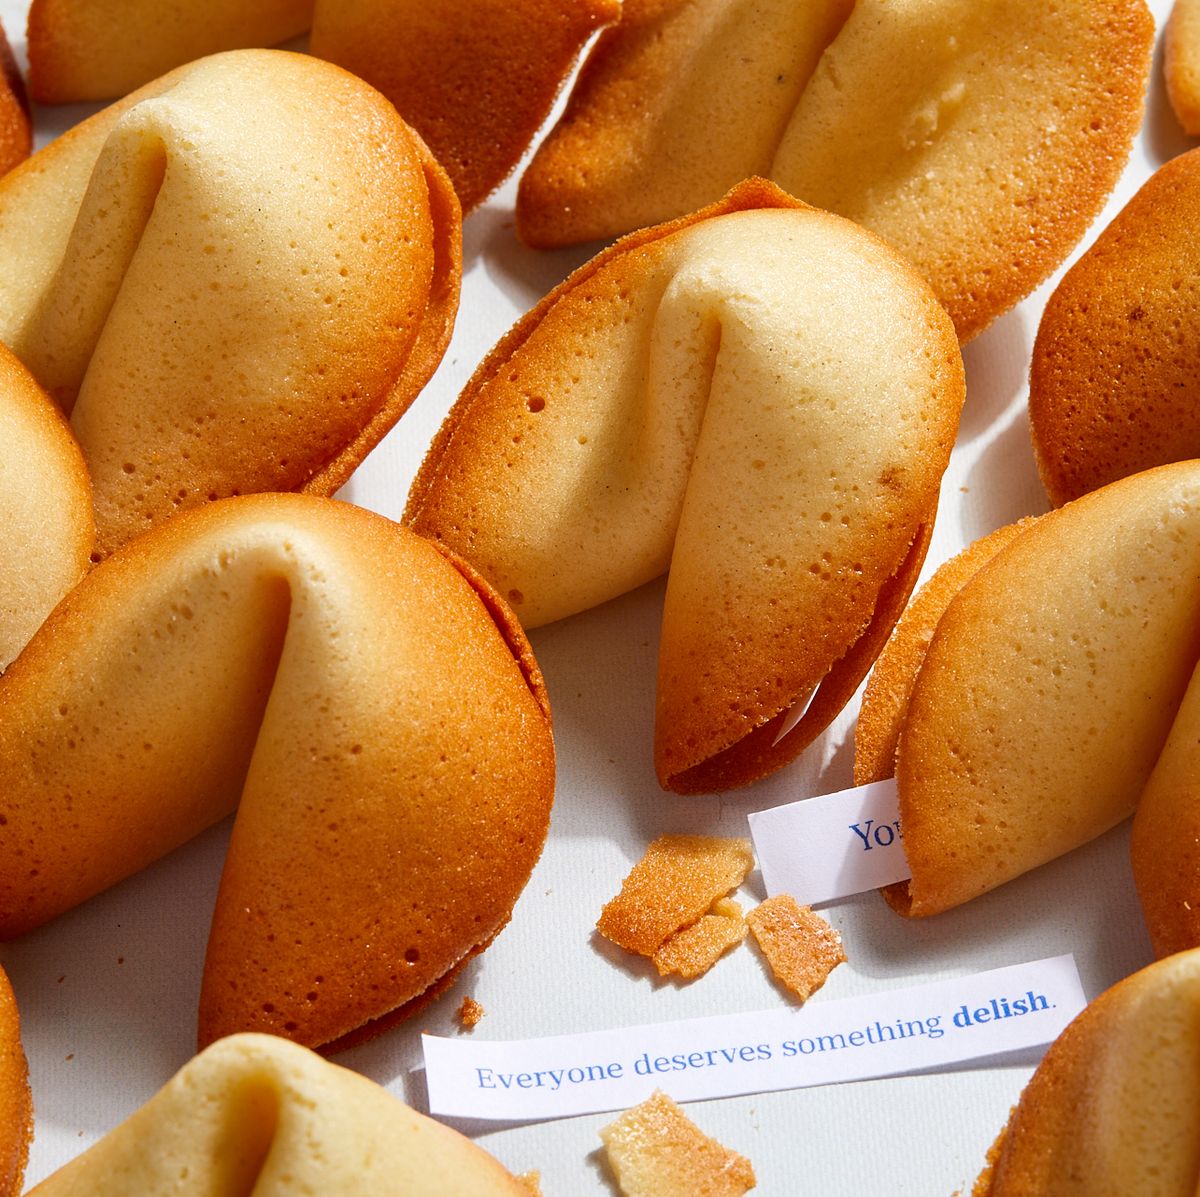 HOW TO: MAKE YOUR OWN FORTUNE COOKIES